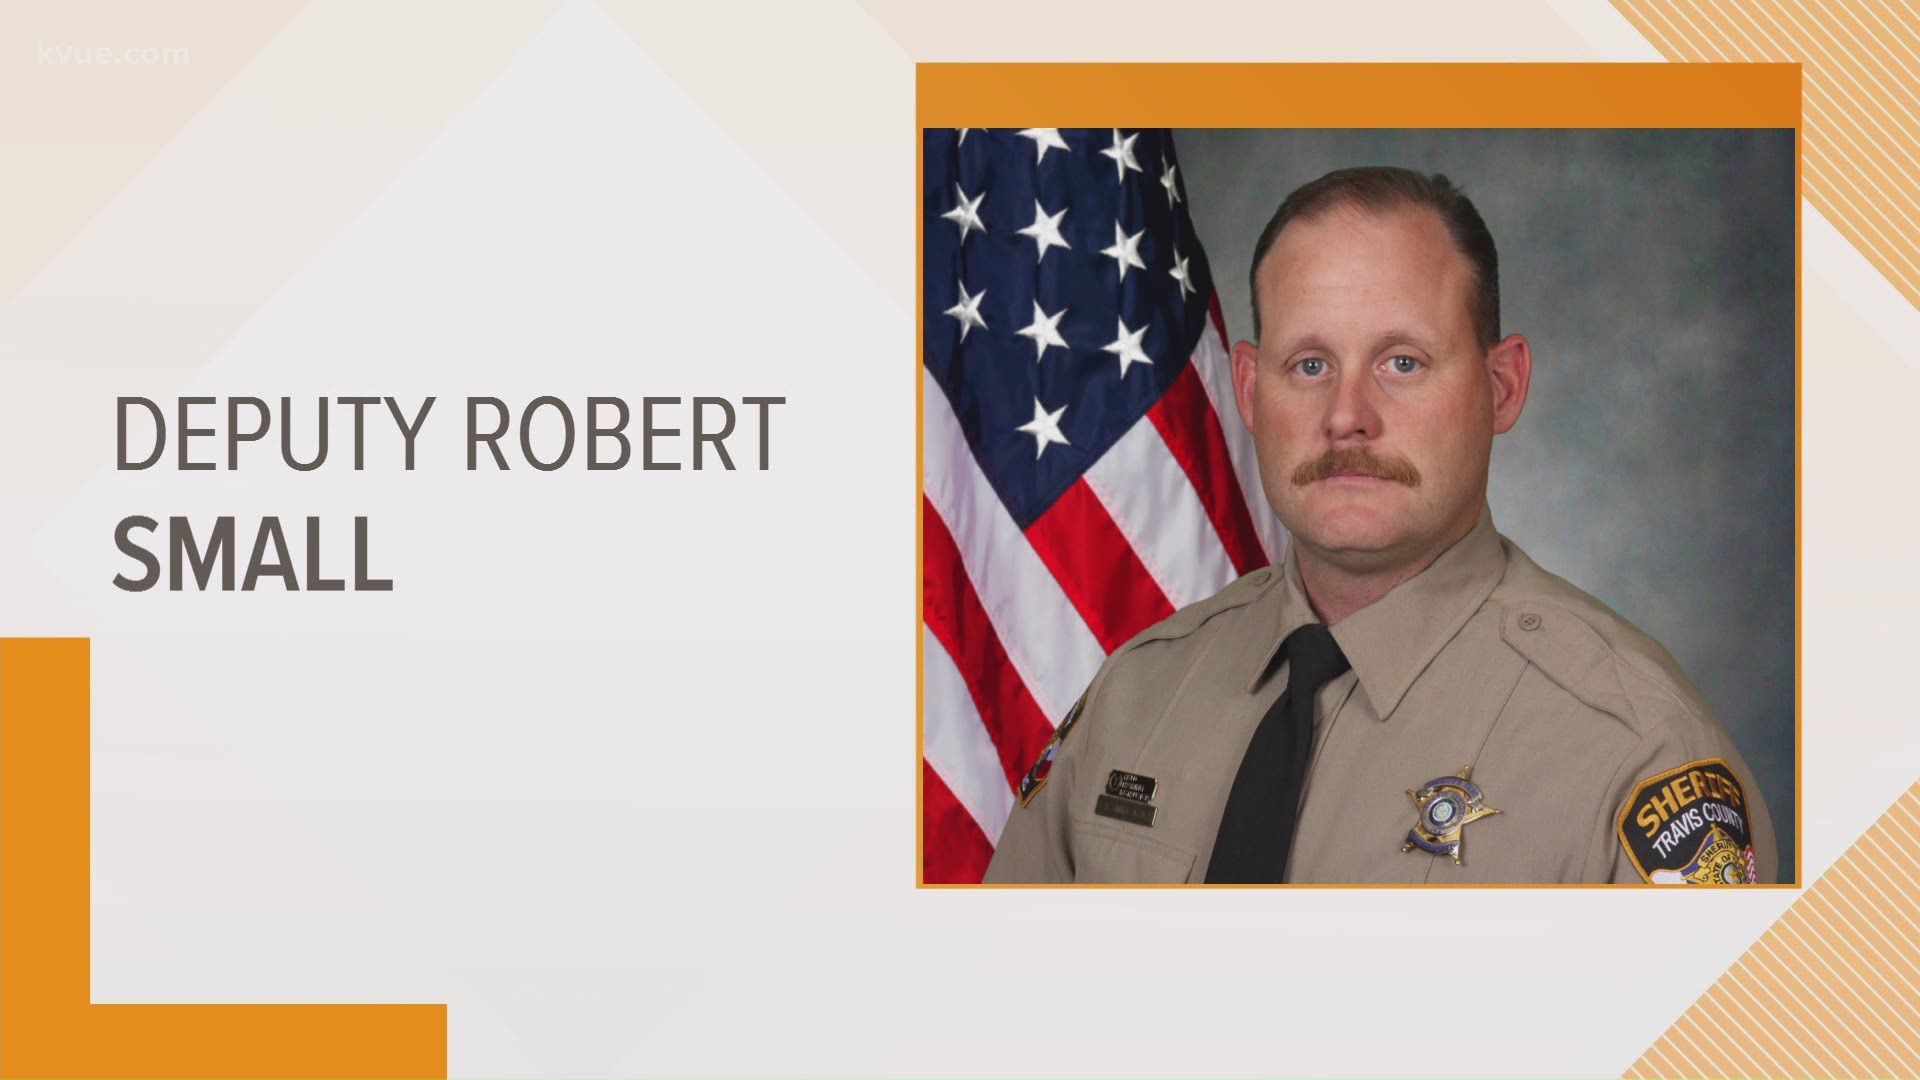 Senior Deputy Robert "Drew" Small was killed in a crash in Milam County Friday evening.